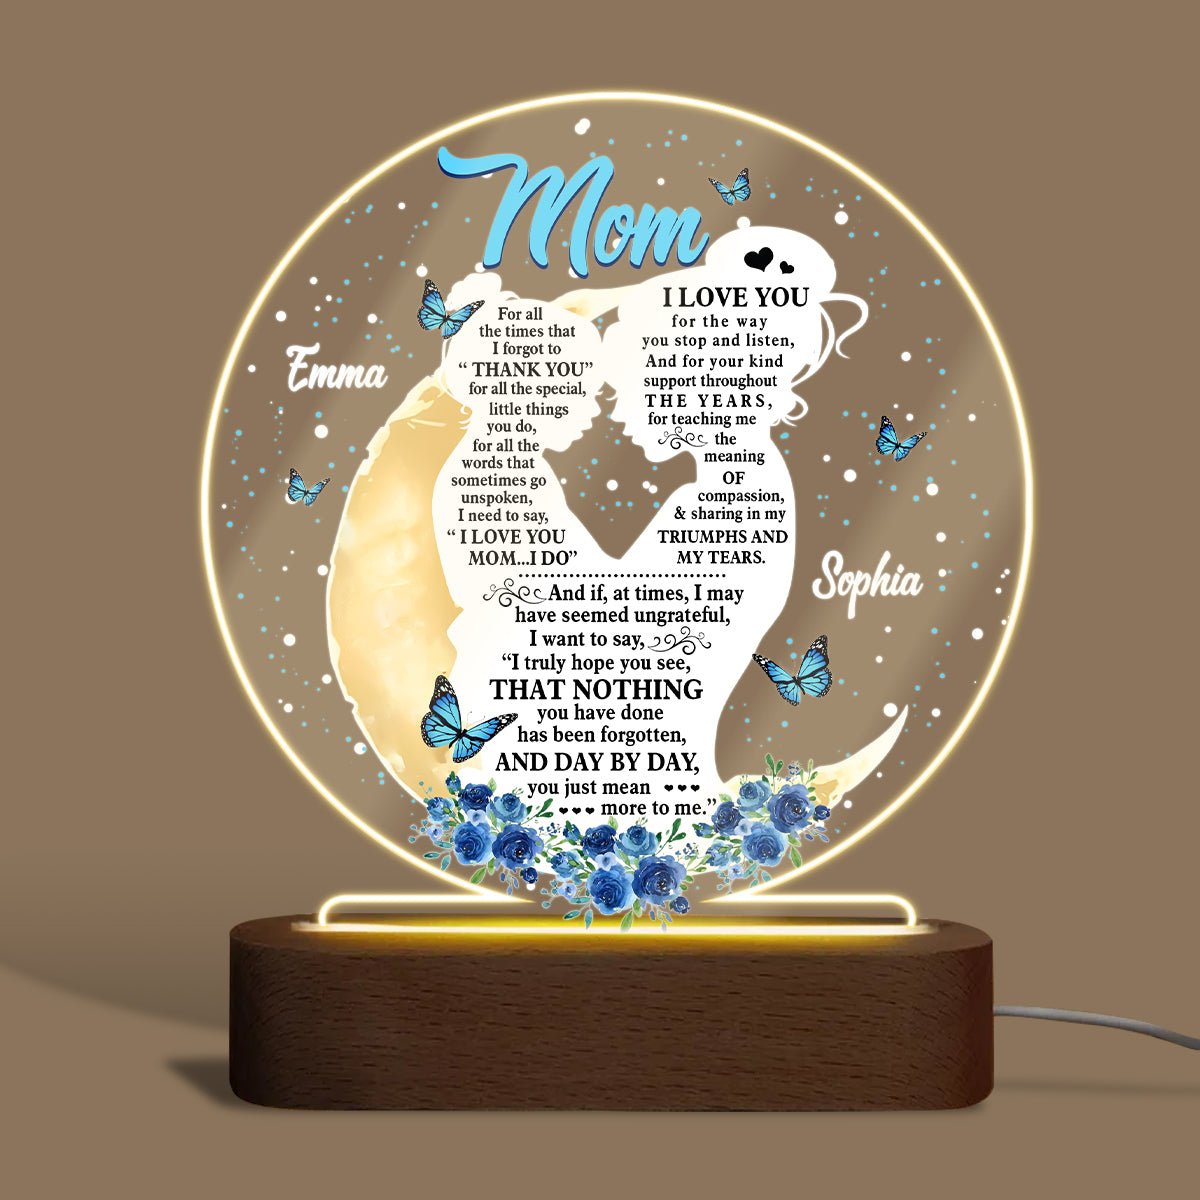 Mom, I Love You - Personalized Round Acrylic LED Lamp - Best Gift For Mother, Grandma - Giftago